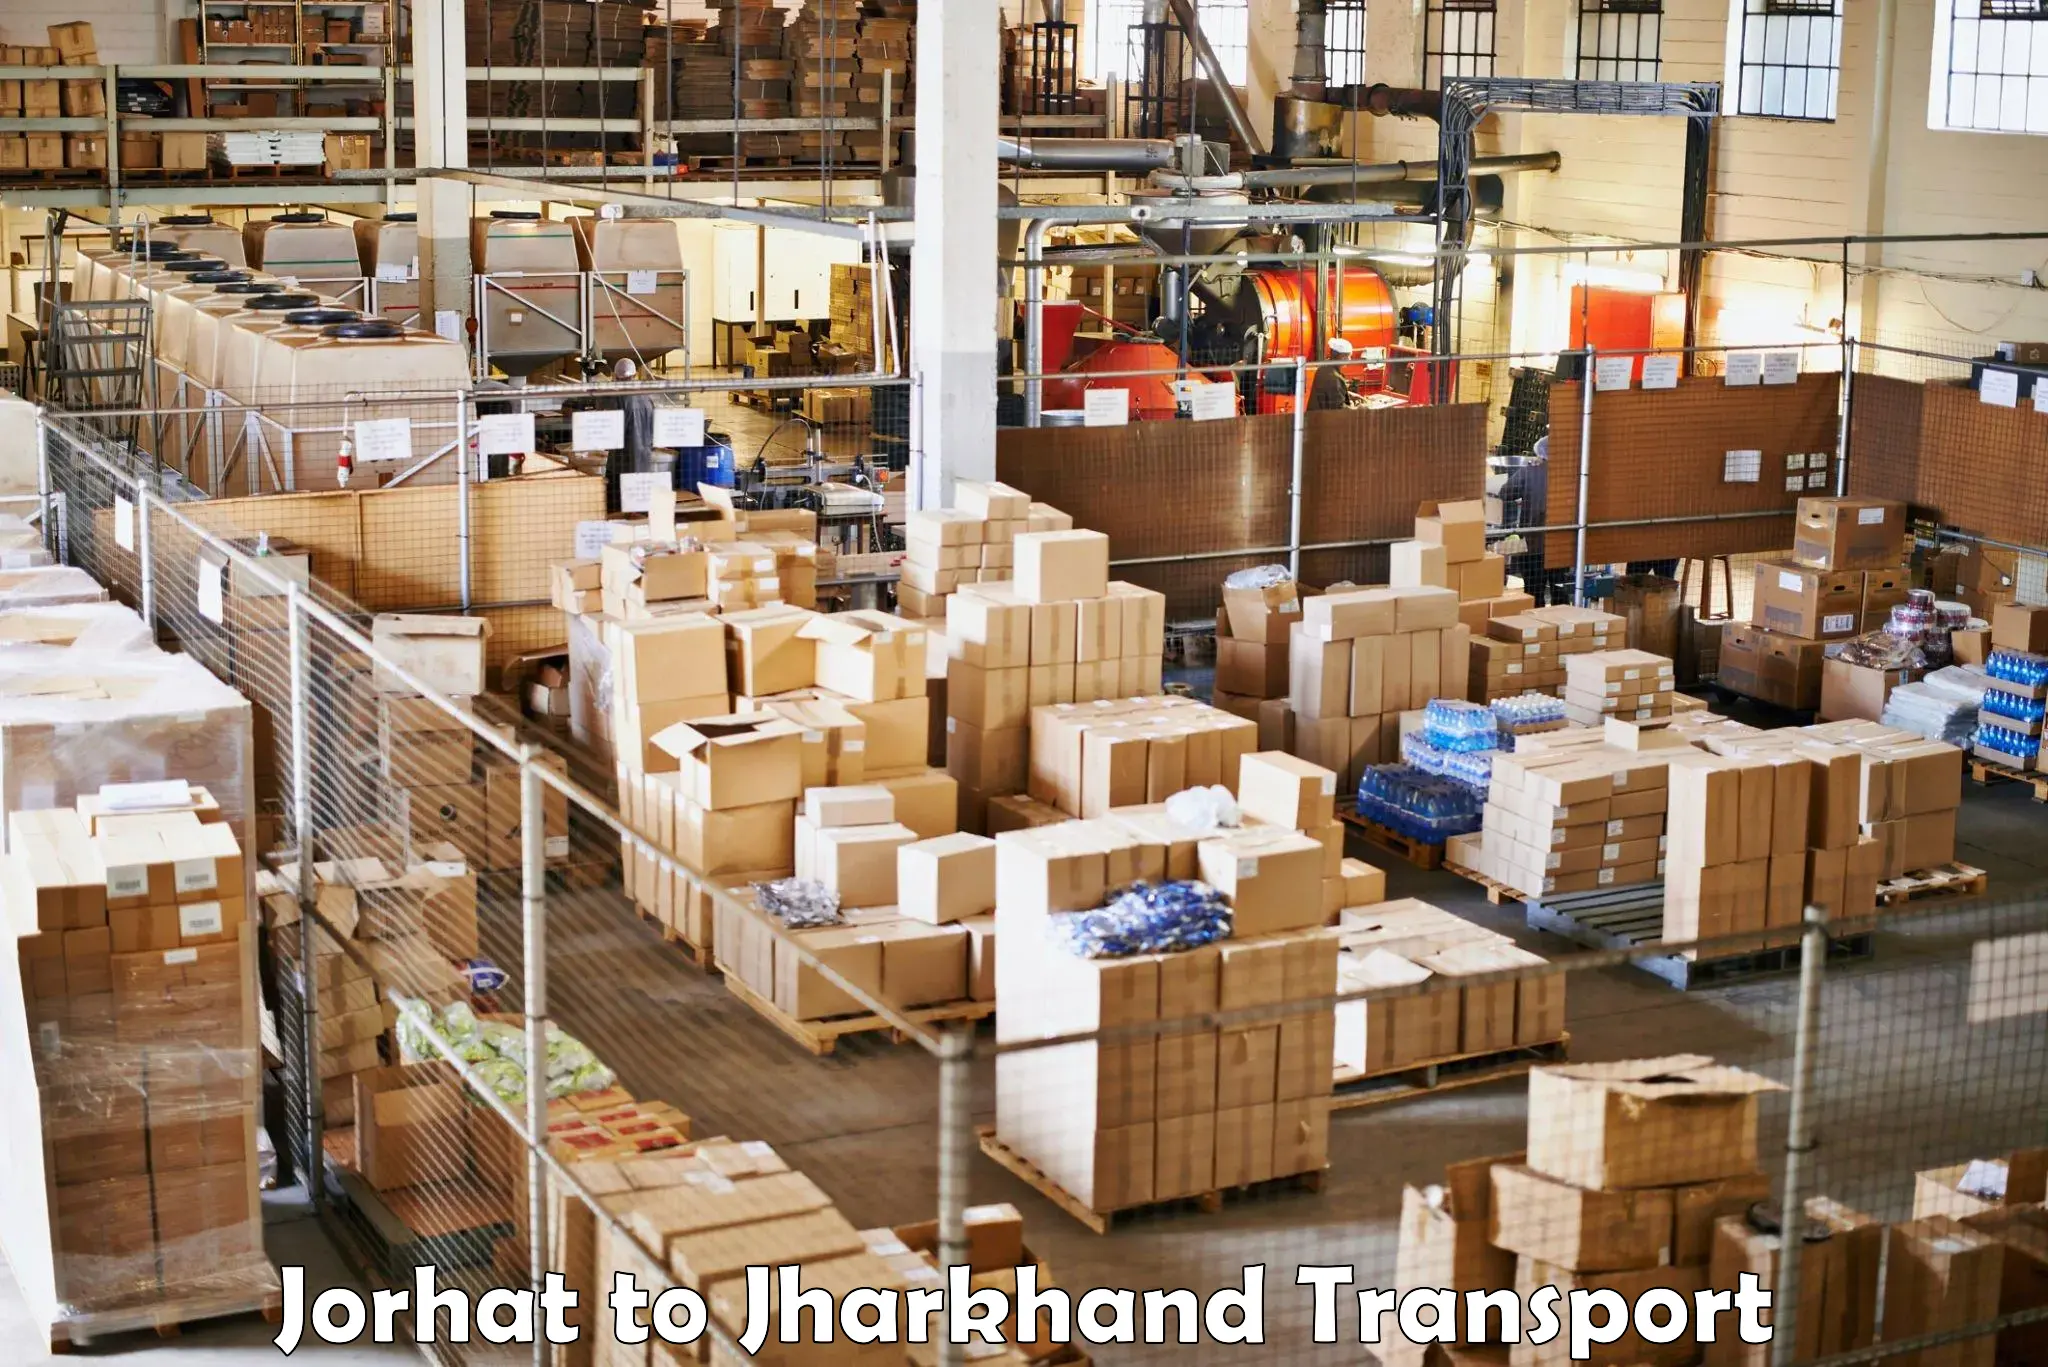 Express transport services Jorhat to Chandil